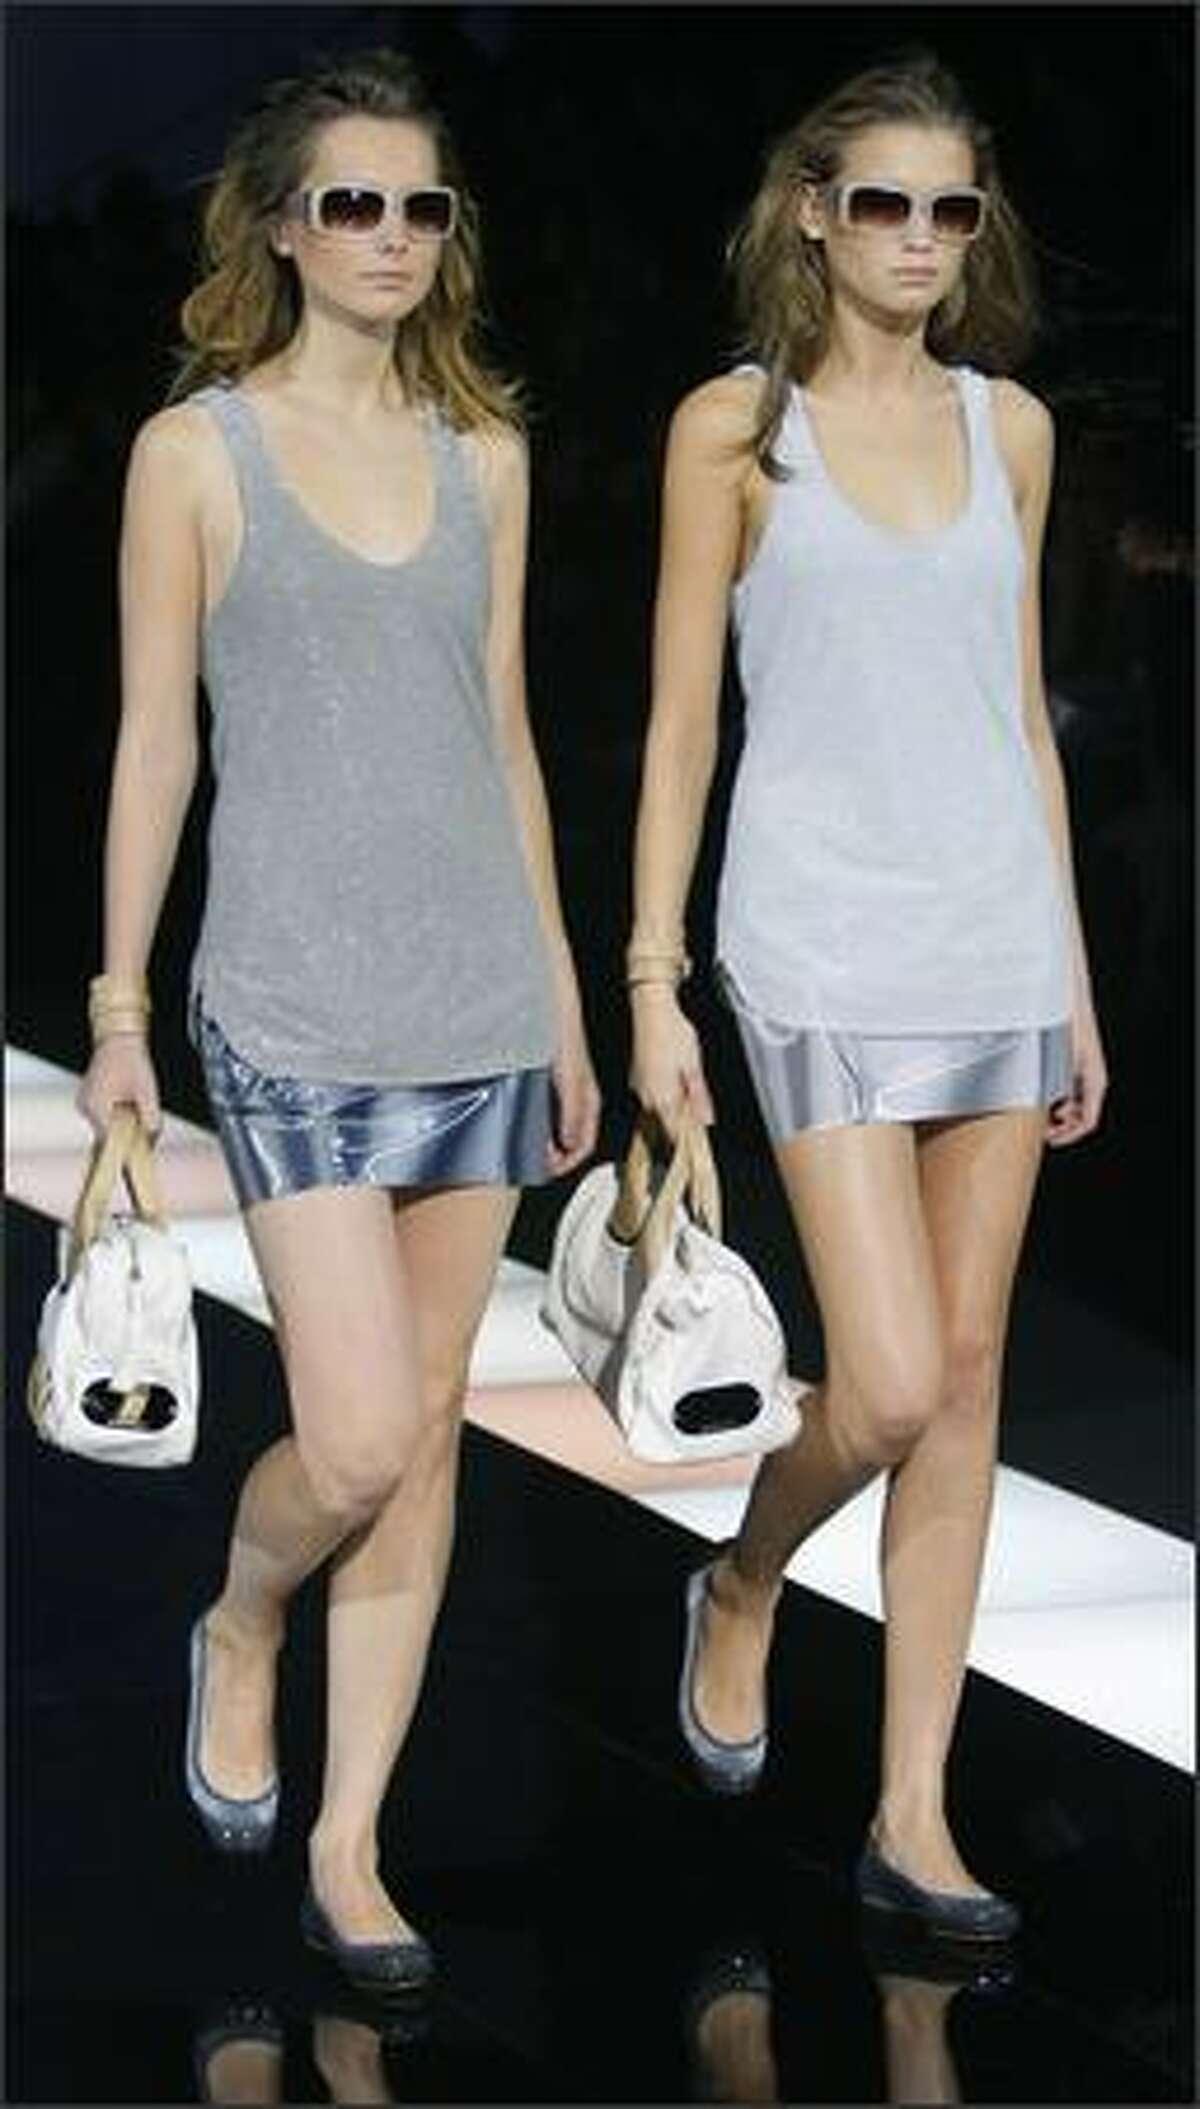 Model present creations by Italian designer Giorgio Armani for Emporio Armani during the Spring/Summer 2008 collections of the Milan ready-to-wear fashion shows.